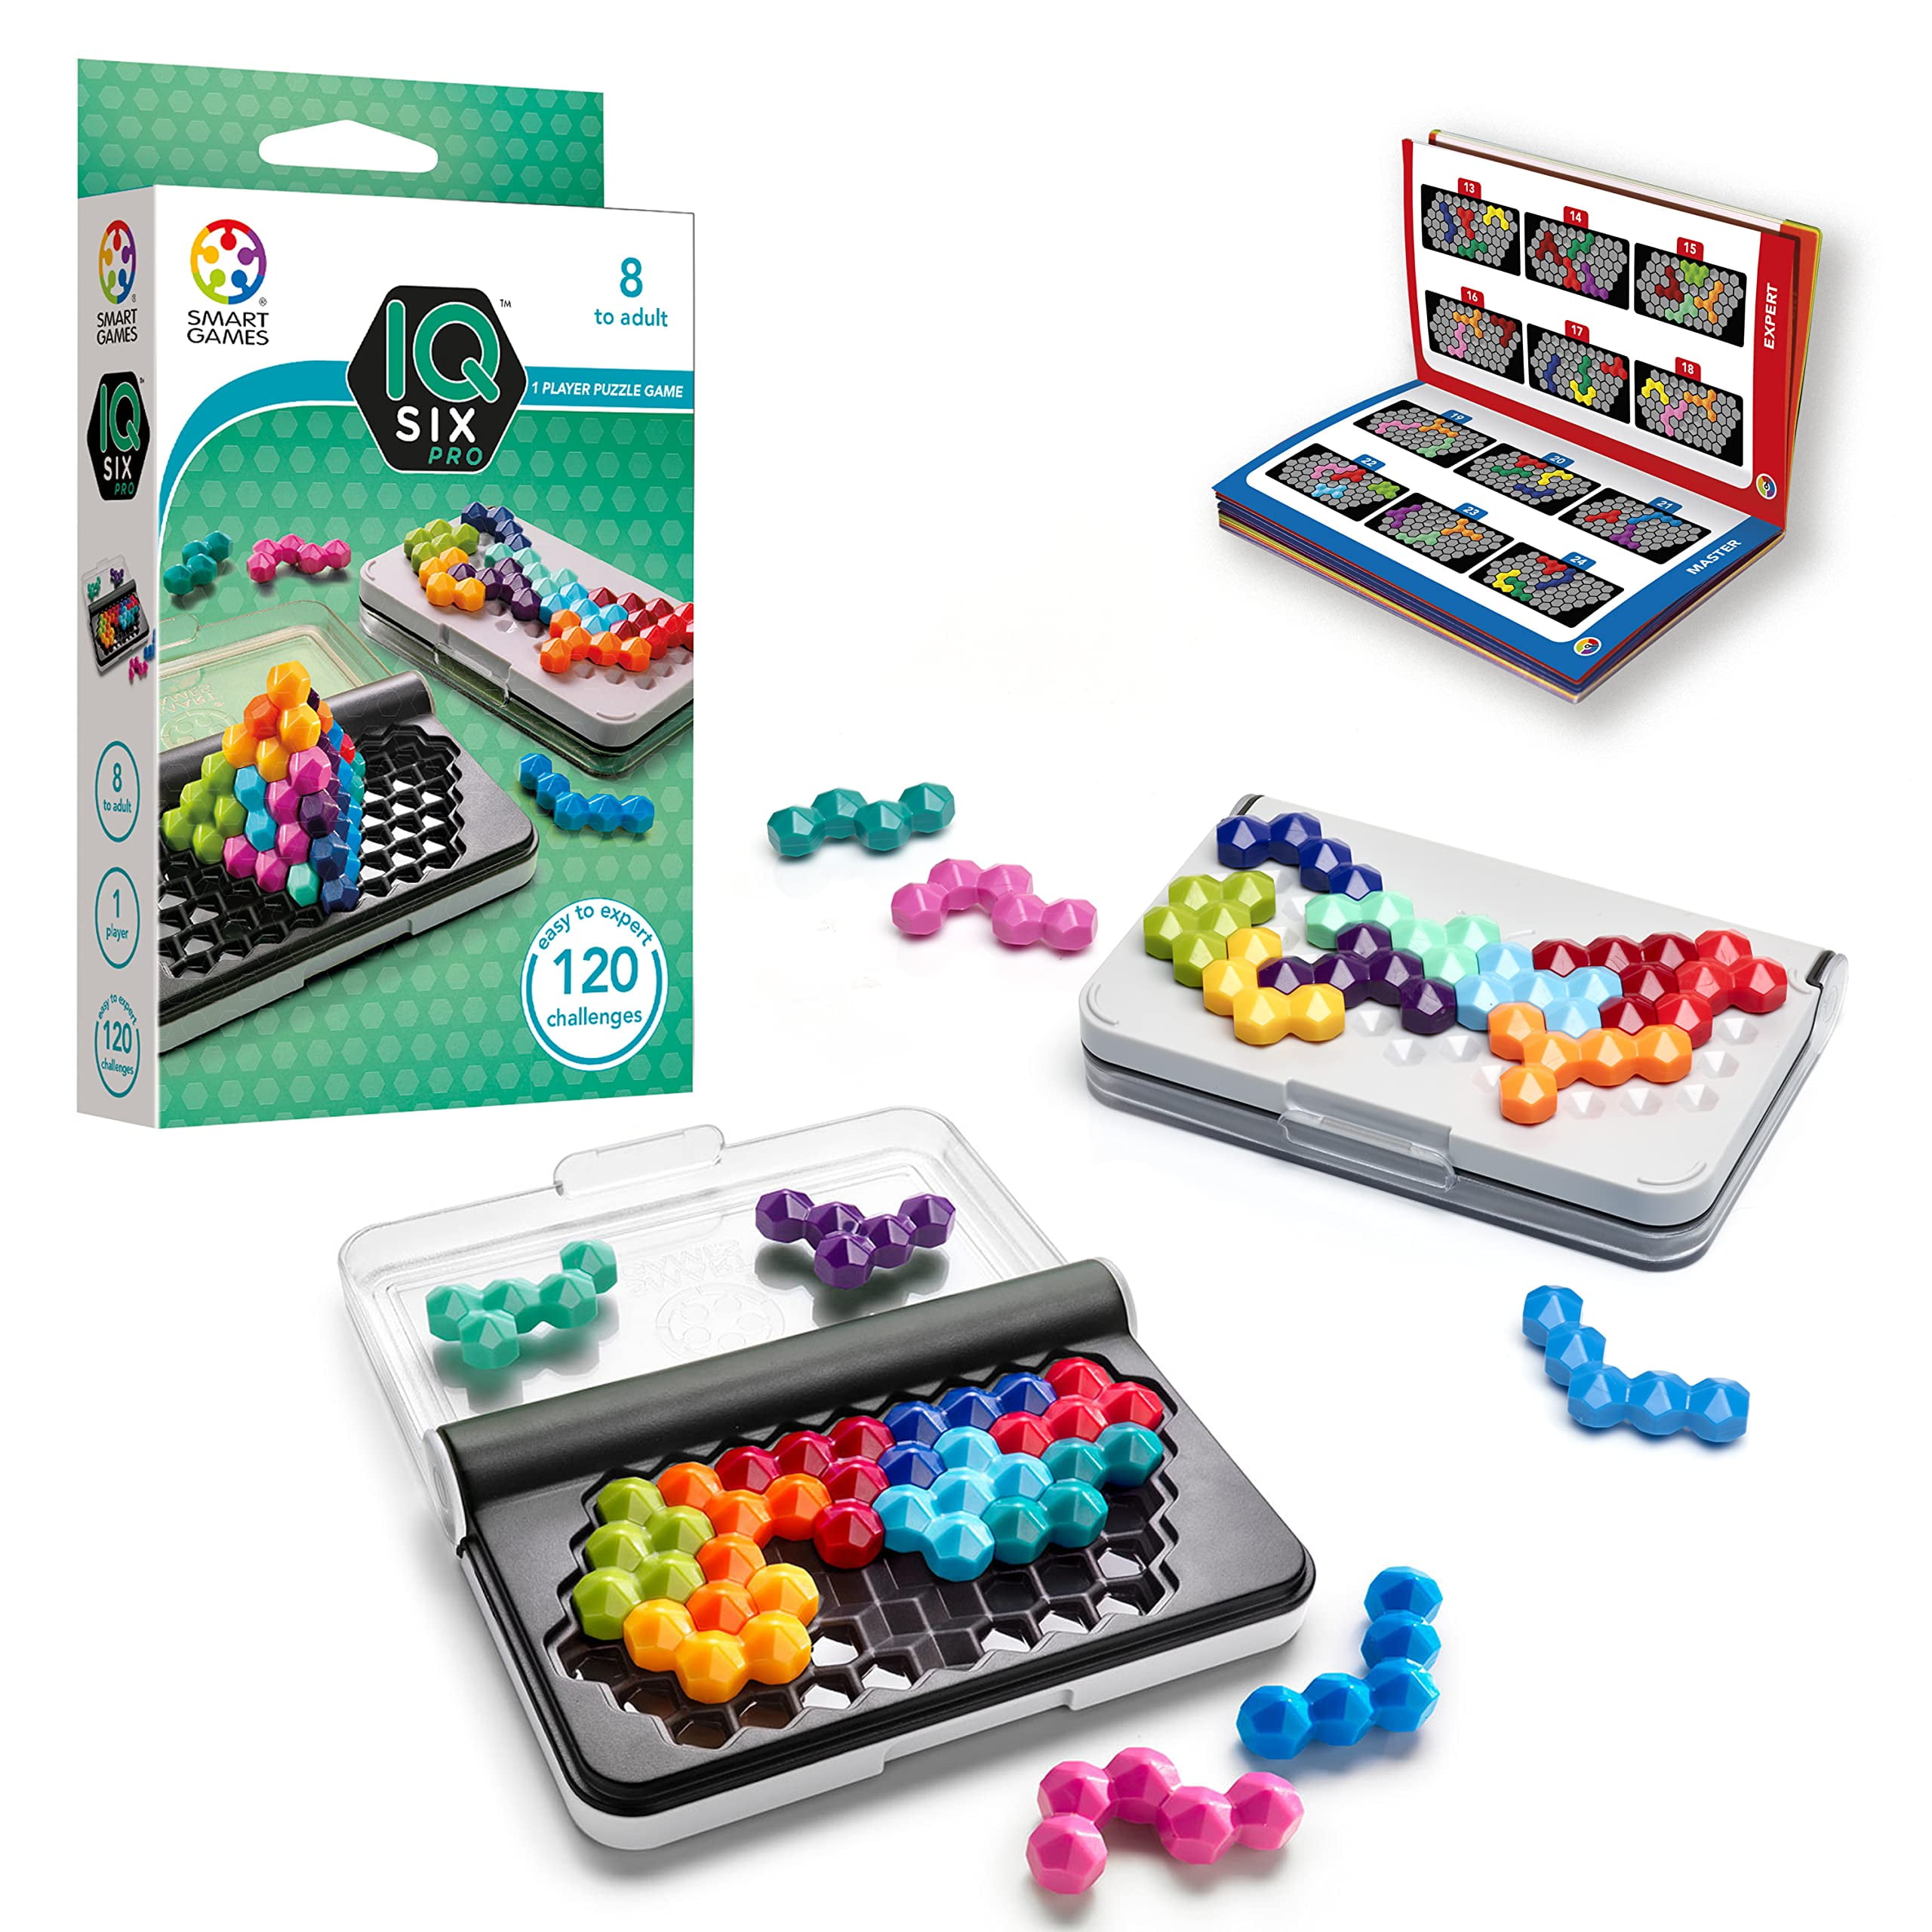 Shop Smart Games IQ Fit for Kids age 6Y+ at Best Price